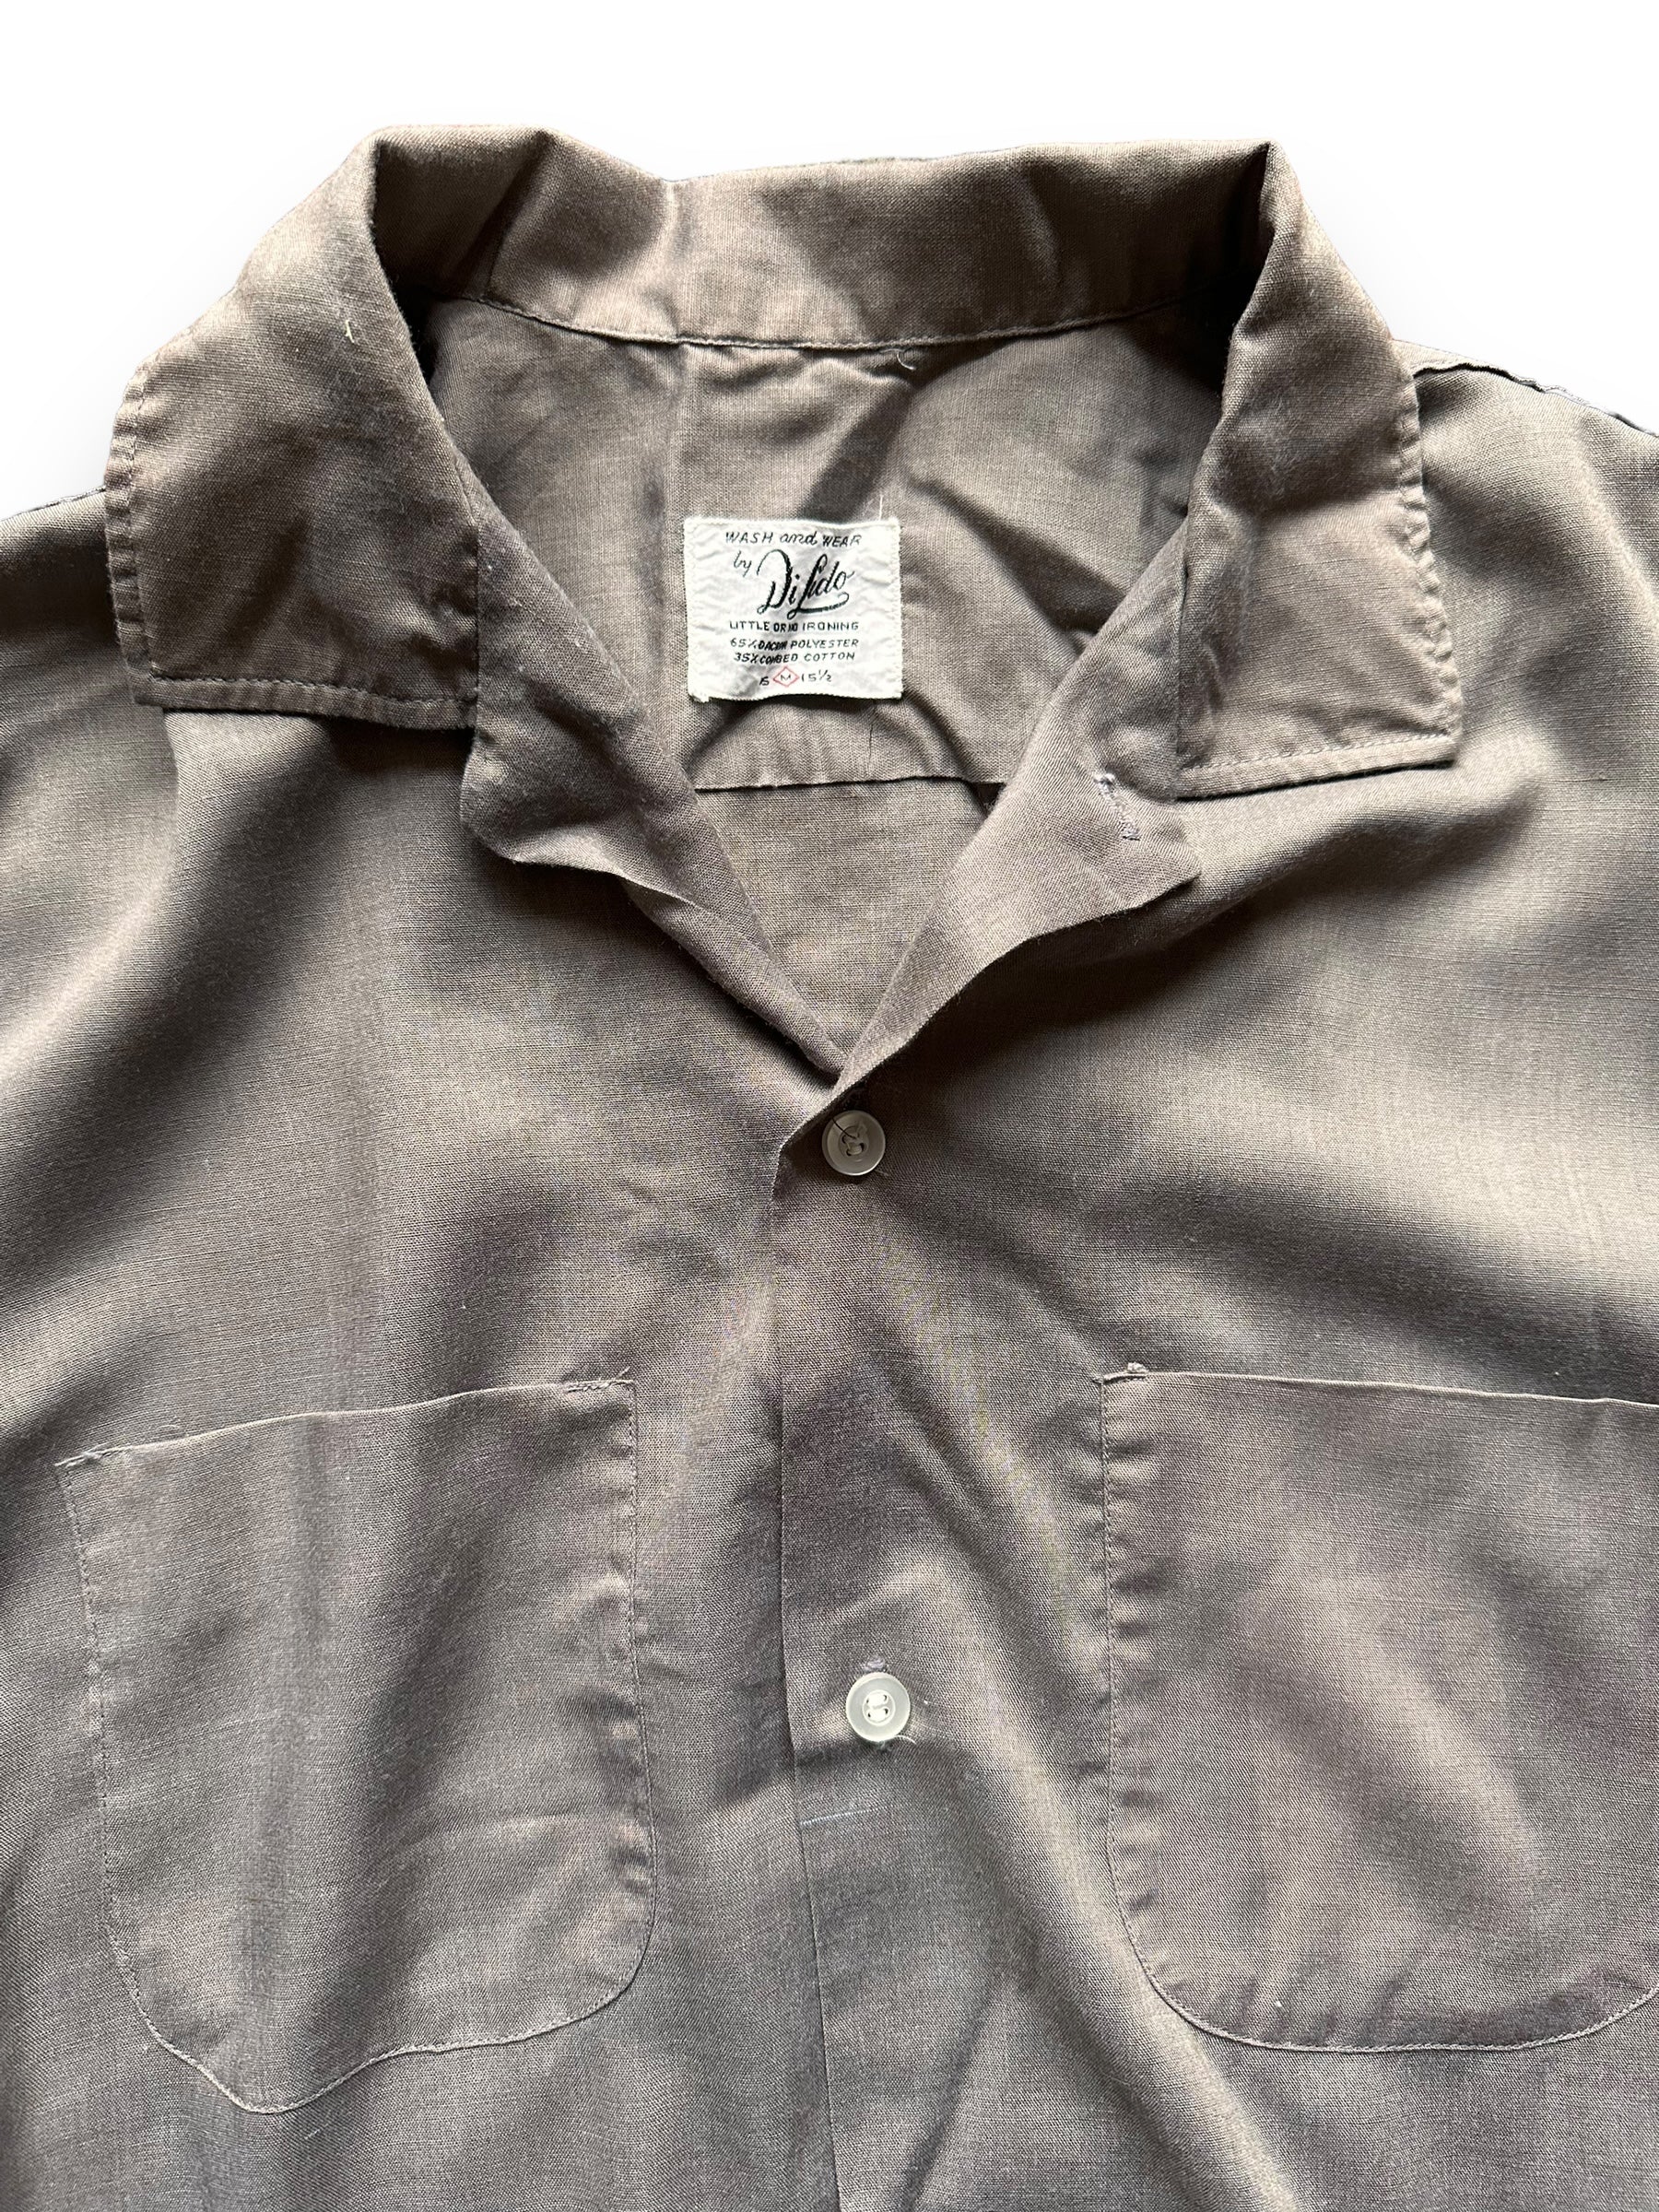 Tag View of Vintage Di Lido Loop Collar Button Up Shirt SZ M | Vintage Rockabilly Shirt Seattle | Barn Owl Vintage Seattle